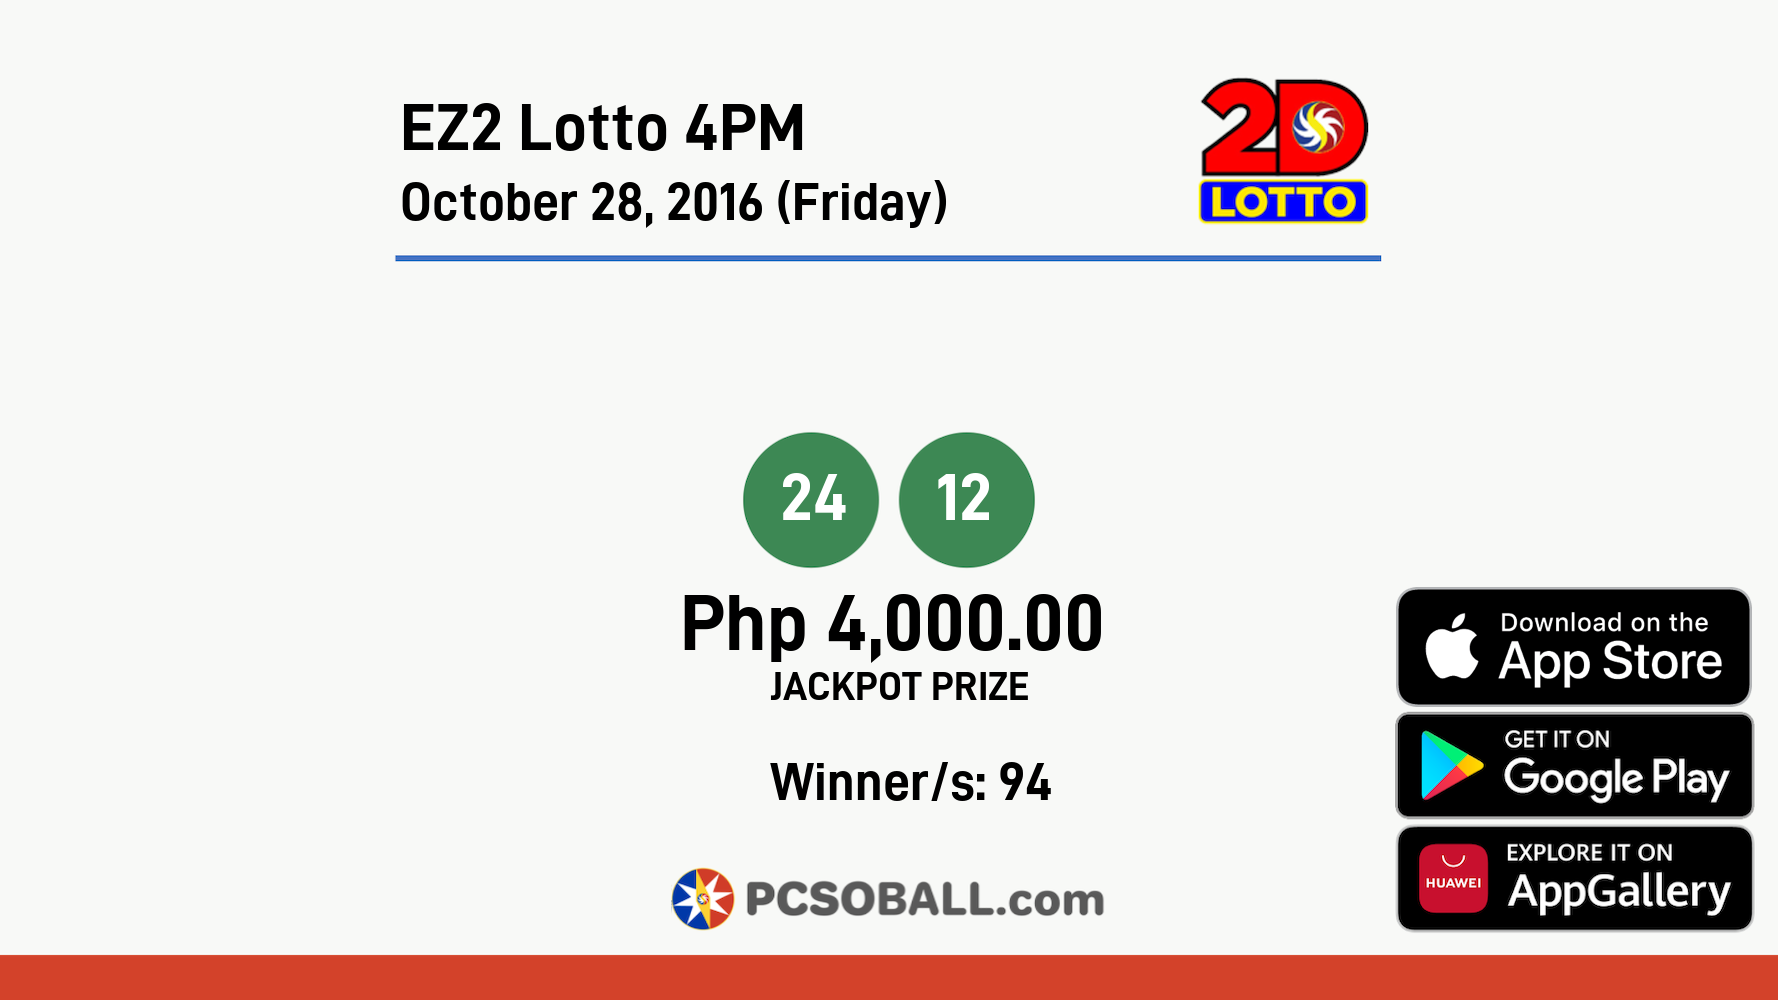 EZ2 Lotto 4PM October 28, 2016 (Friday) Result